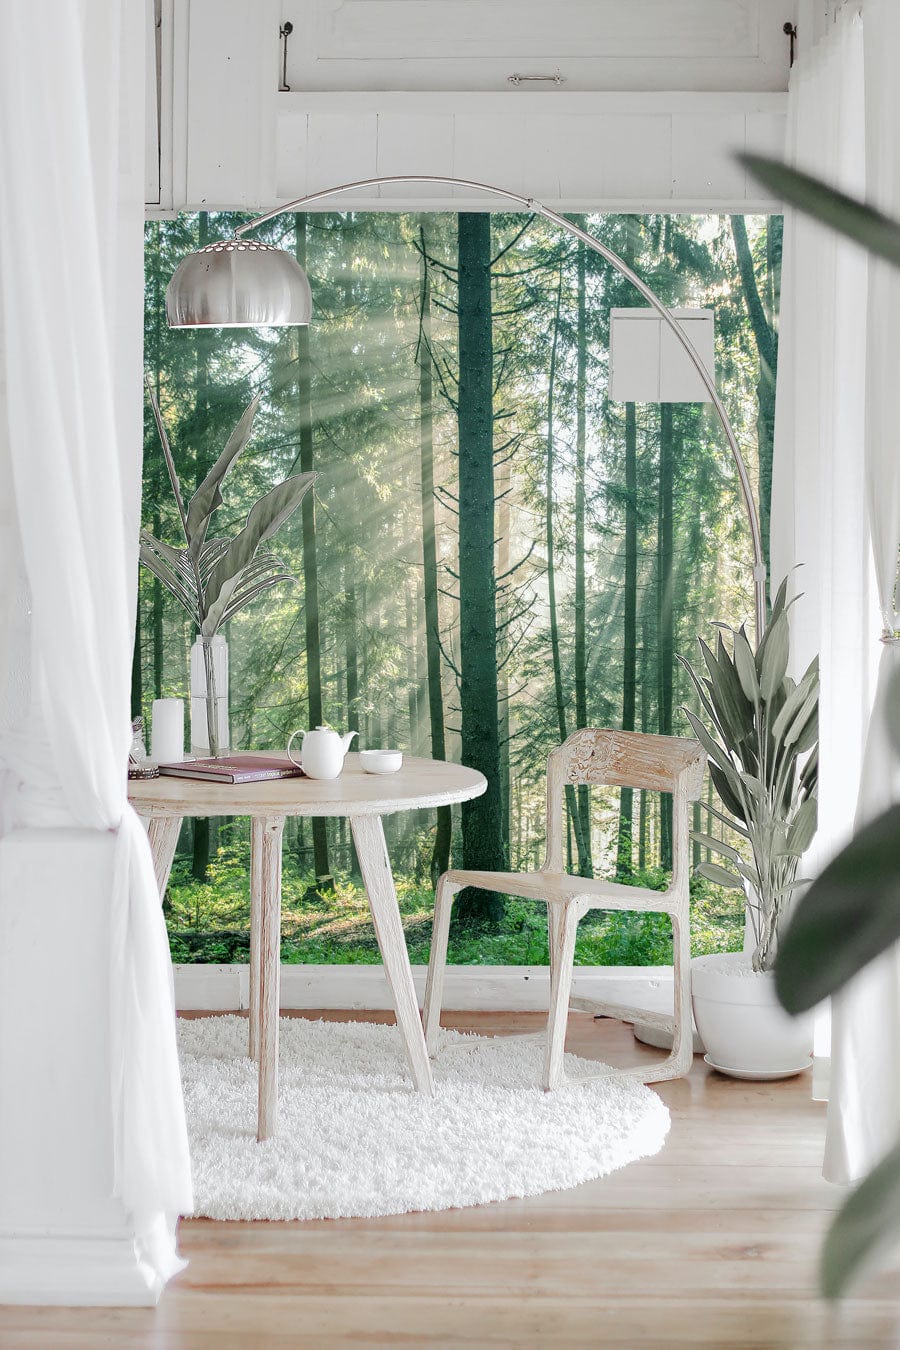 Interior design with a 3D visual forest and a natural look